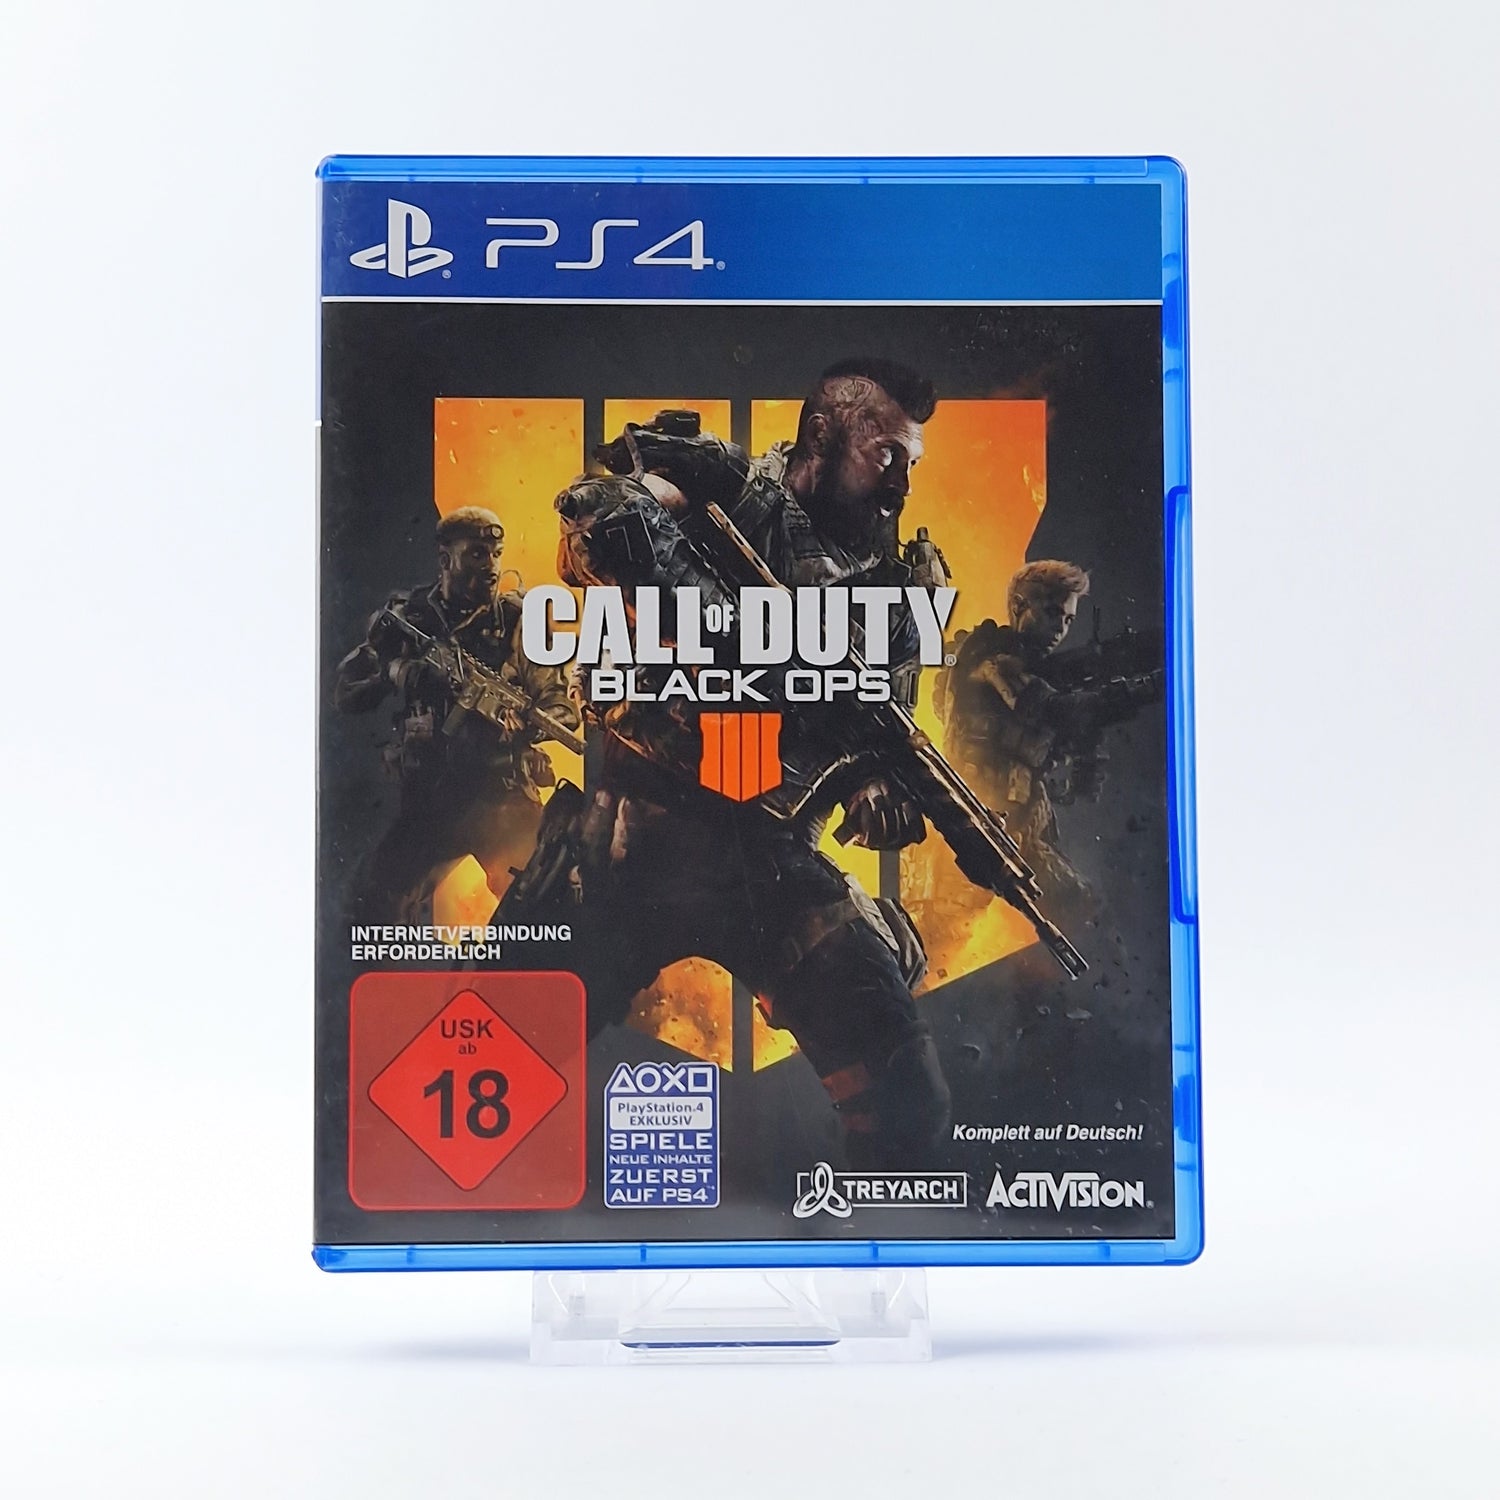 Playstation 4 game: Call of Duty Black Ops - OVP instructions CD - SONY PS4 USK18